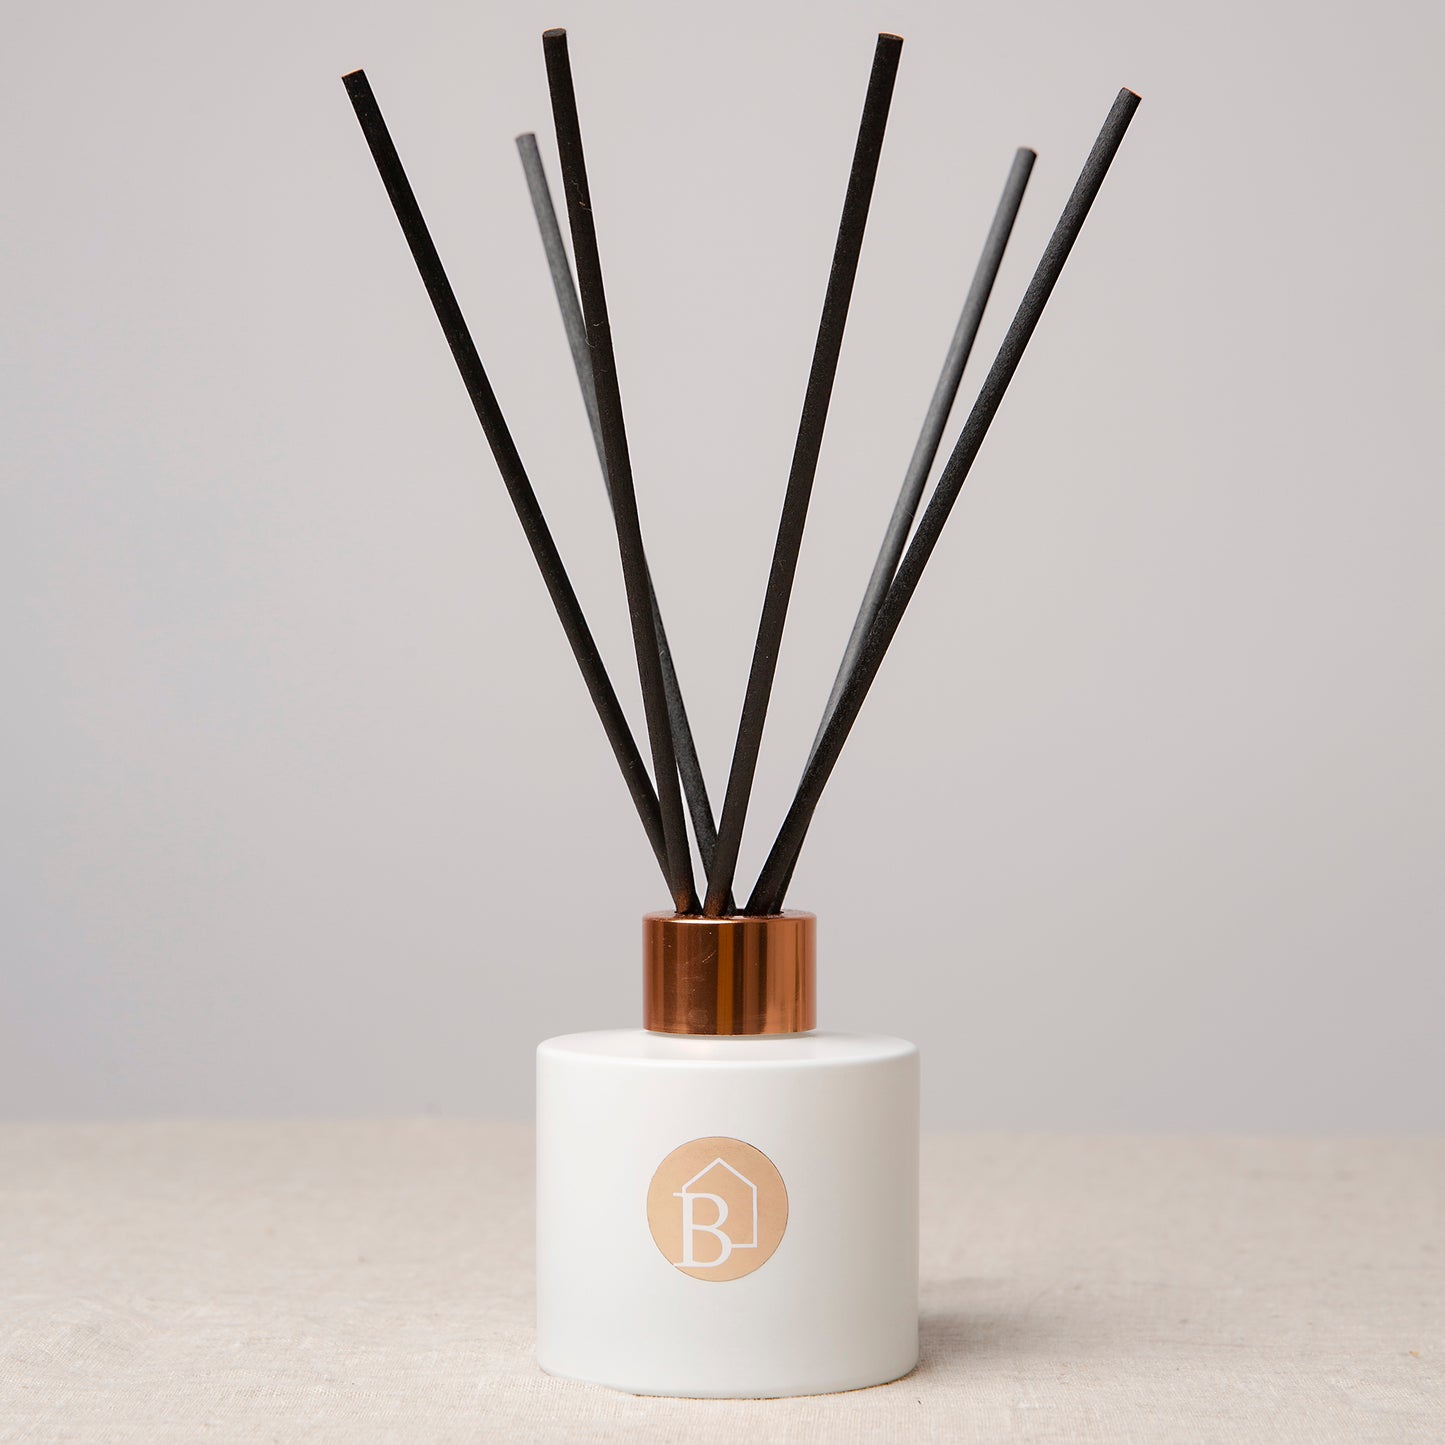 The Brick House Reed Diffuser